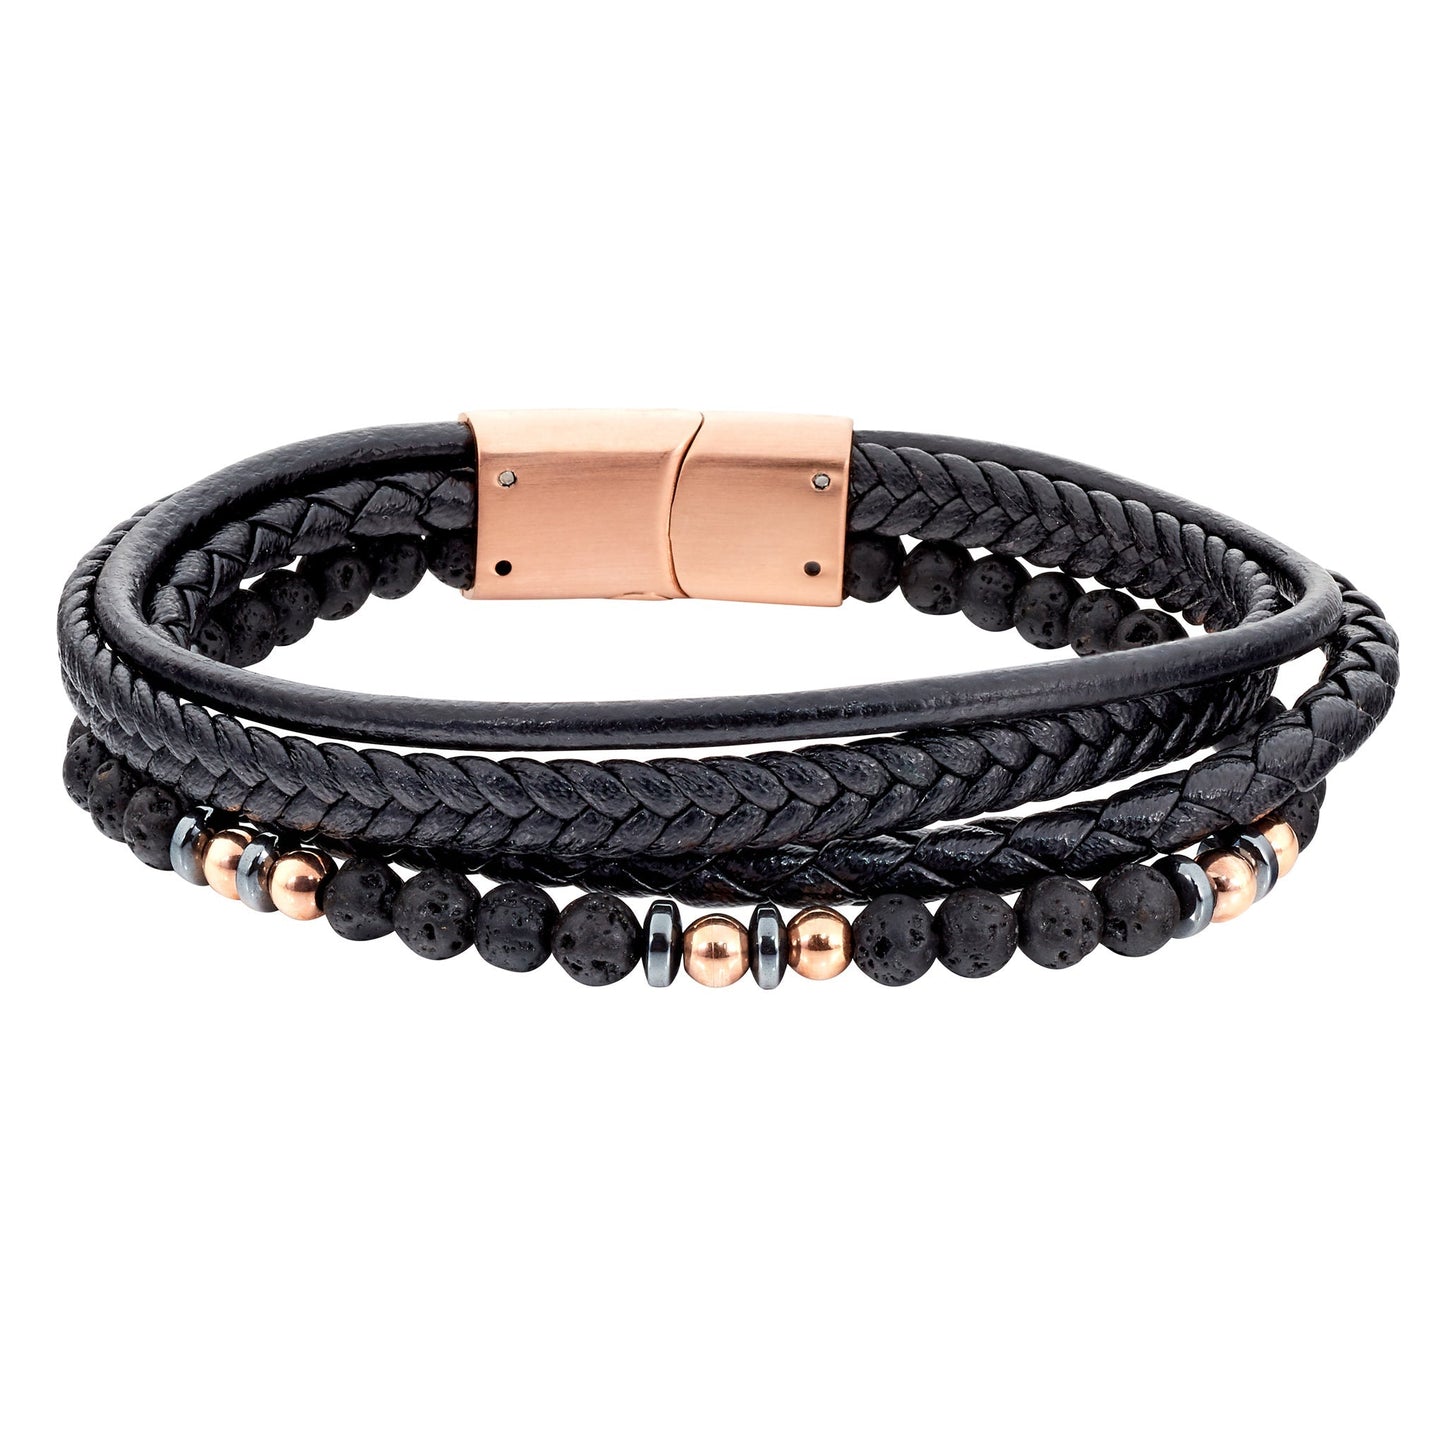 A black leather 4 cord bracelet with rose gold & black beads displayed on a neutral white background.